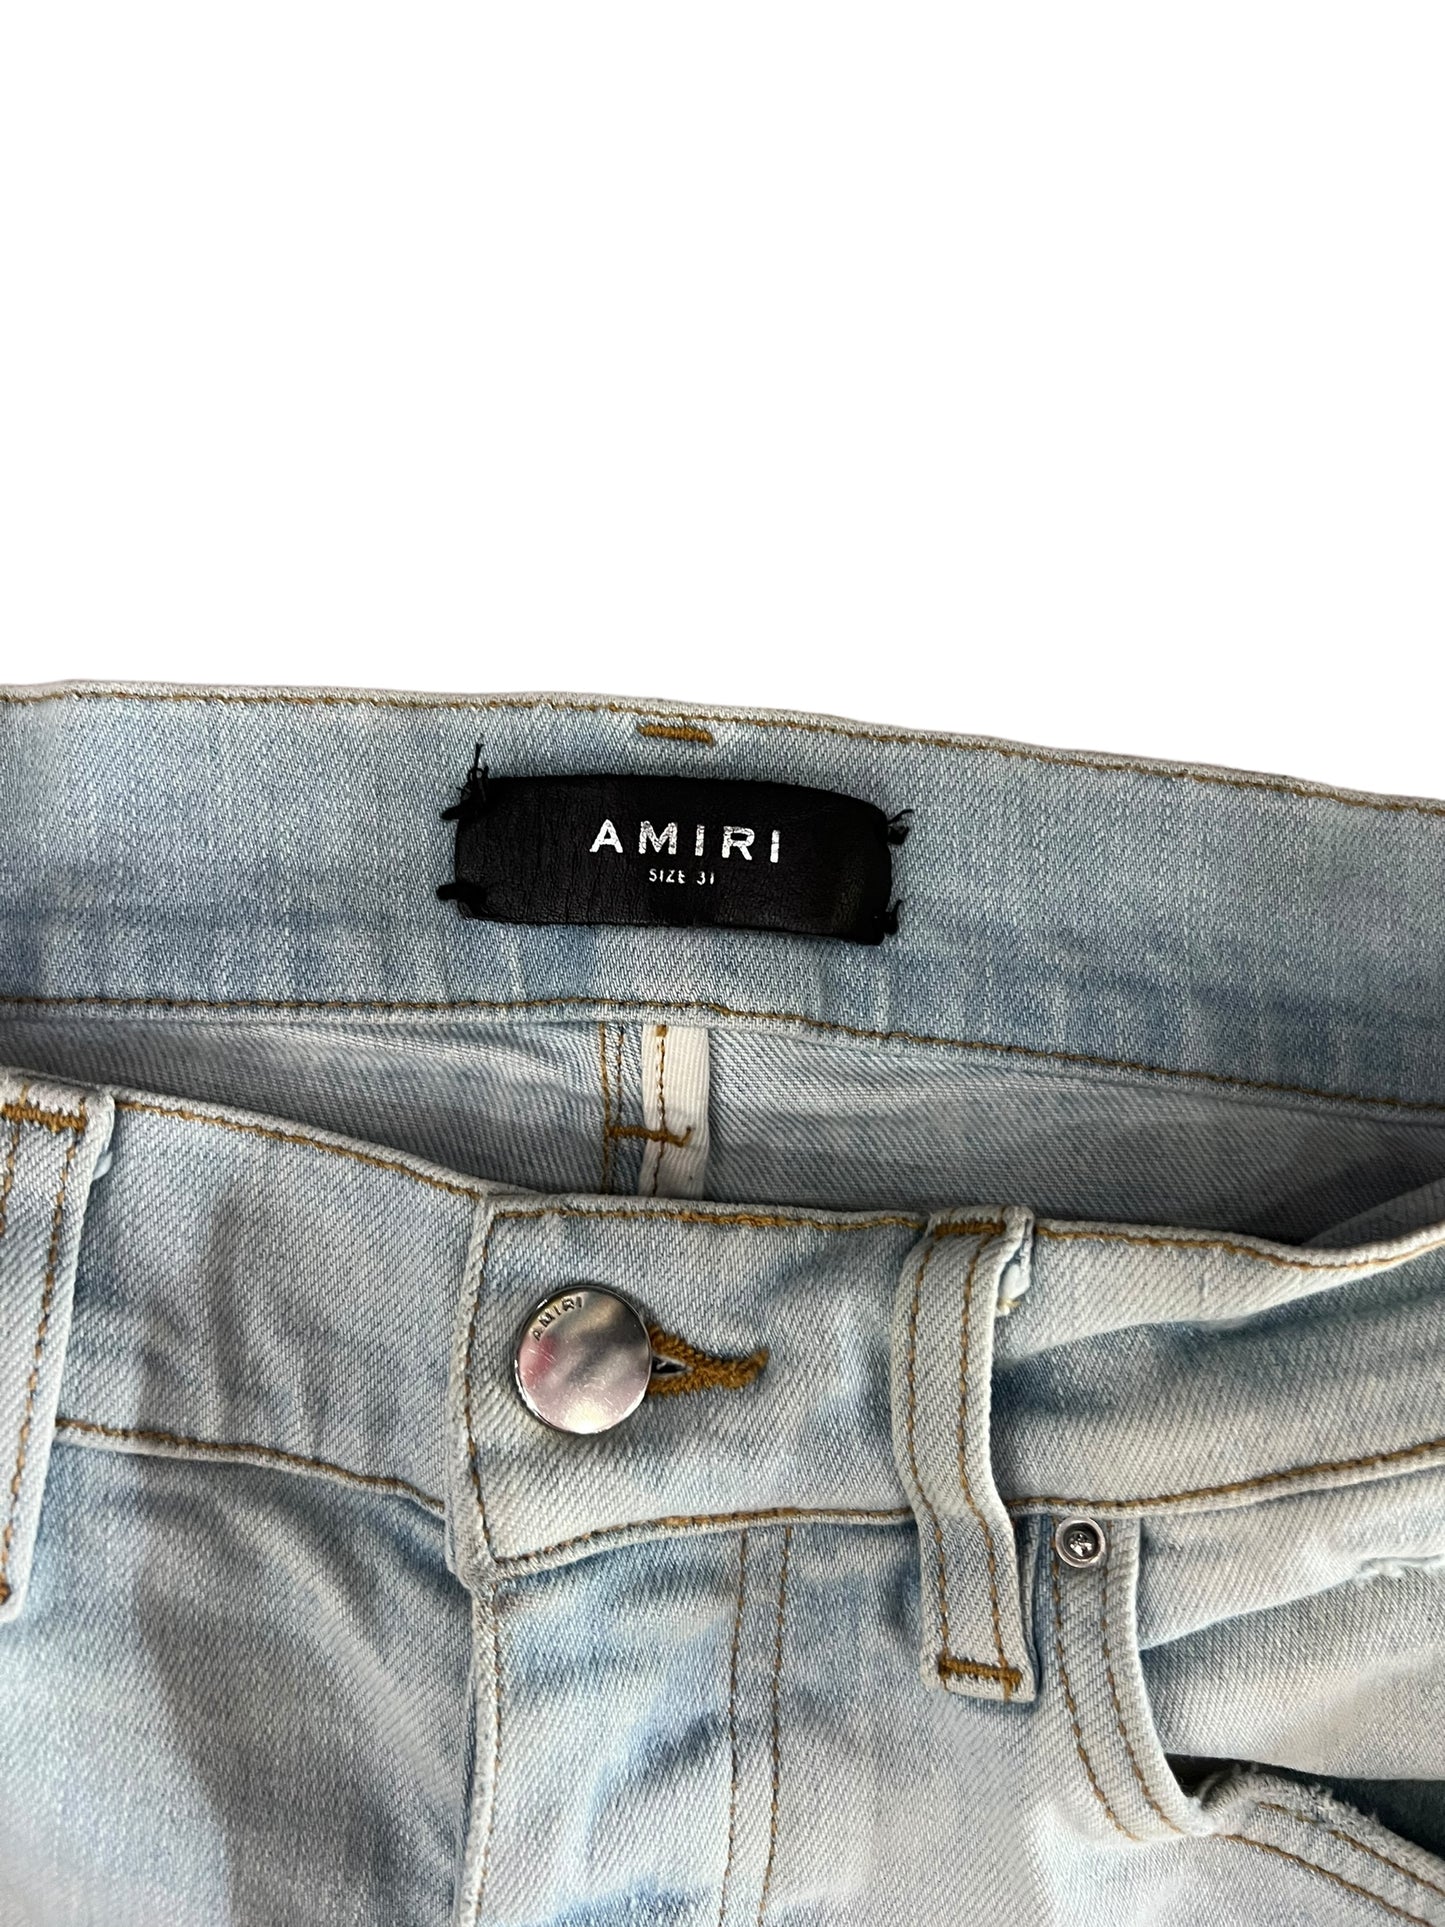 Amiri Blue Stack Jeans size 31 pre-owned